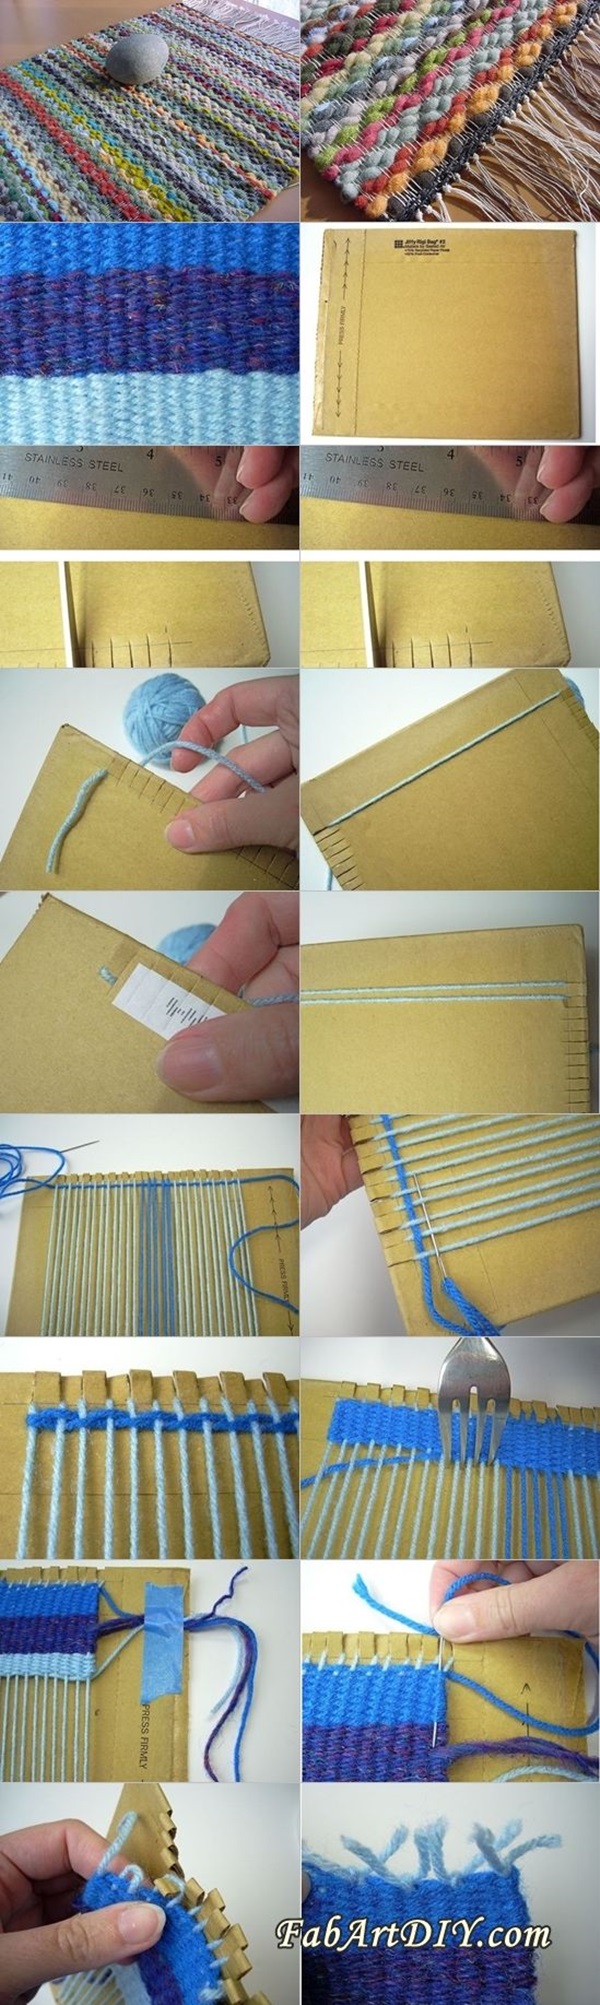 Addictive weaving Tutorials to try this summer (4)